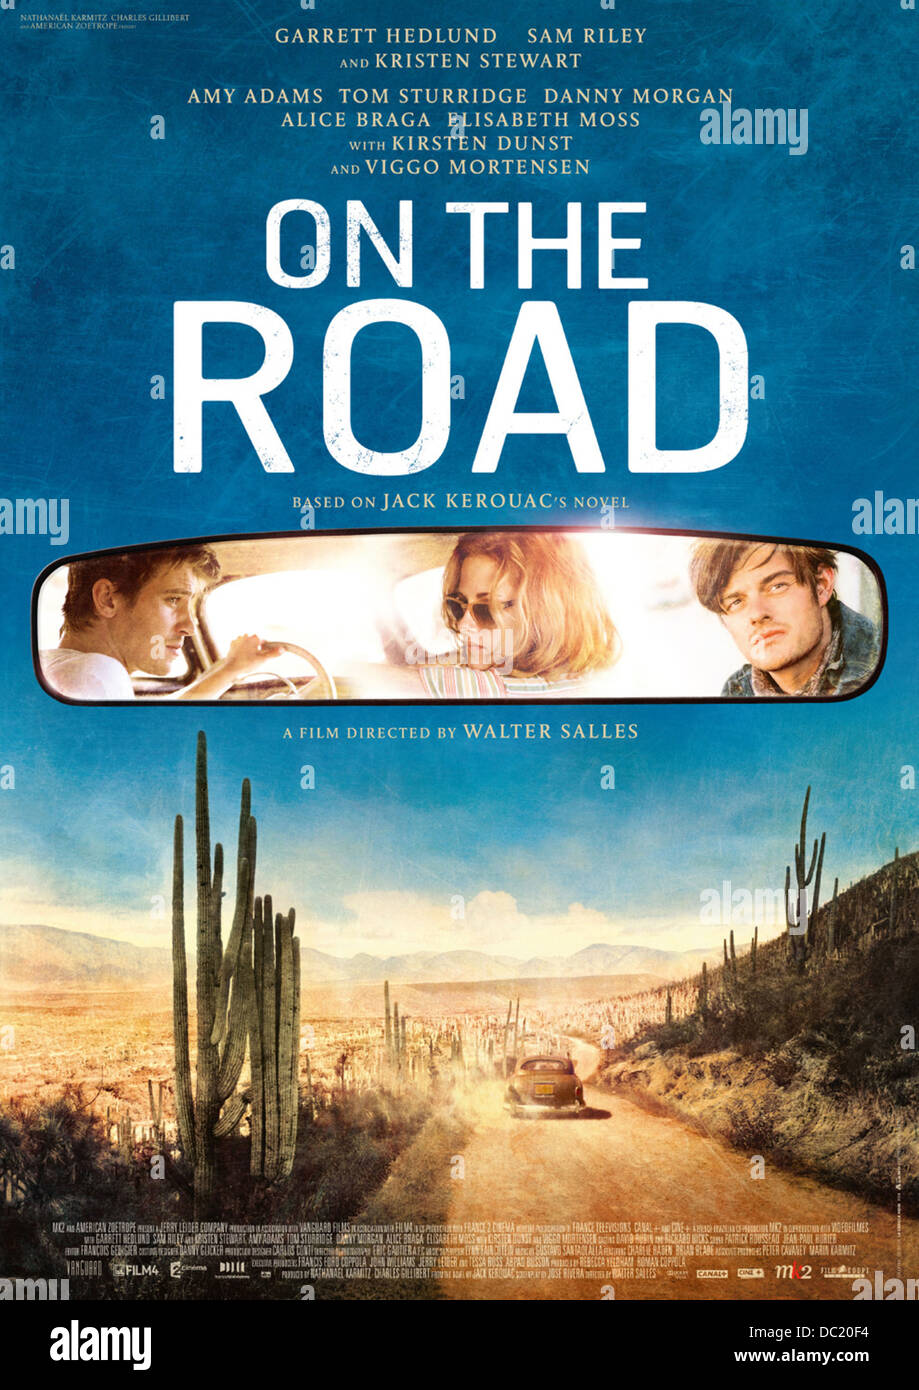 ON THE ROAD (POSTER) (2012) WALTER SALLES (DIR) 017 MOVIESTORE COLLECTION LTD Stock Photo